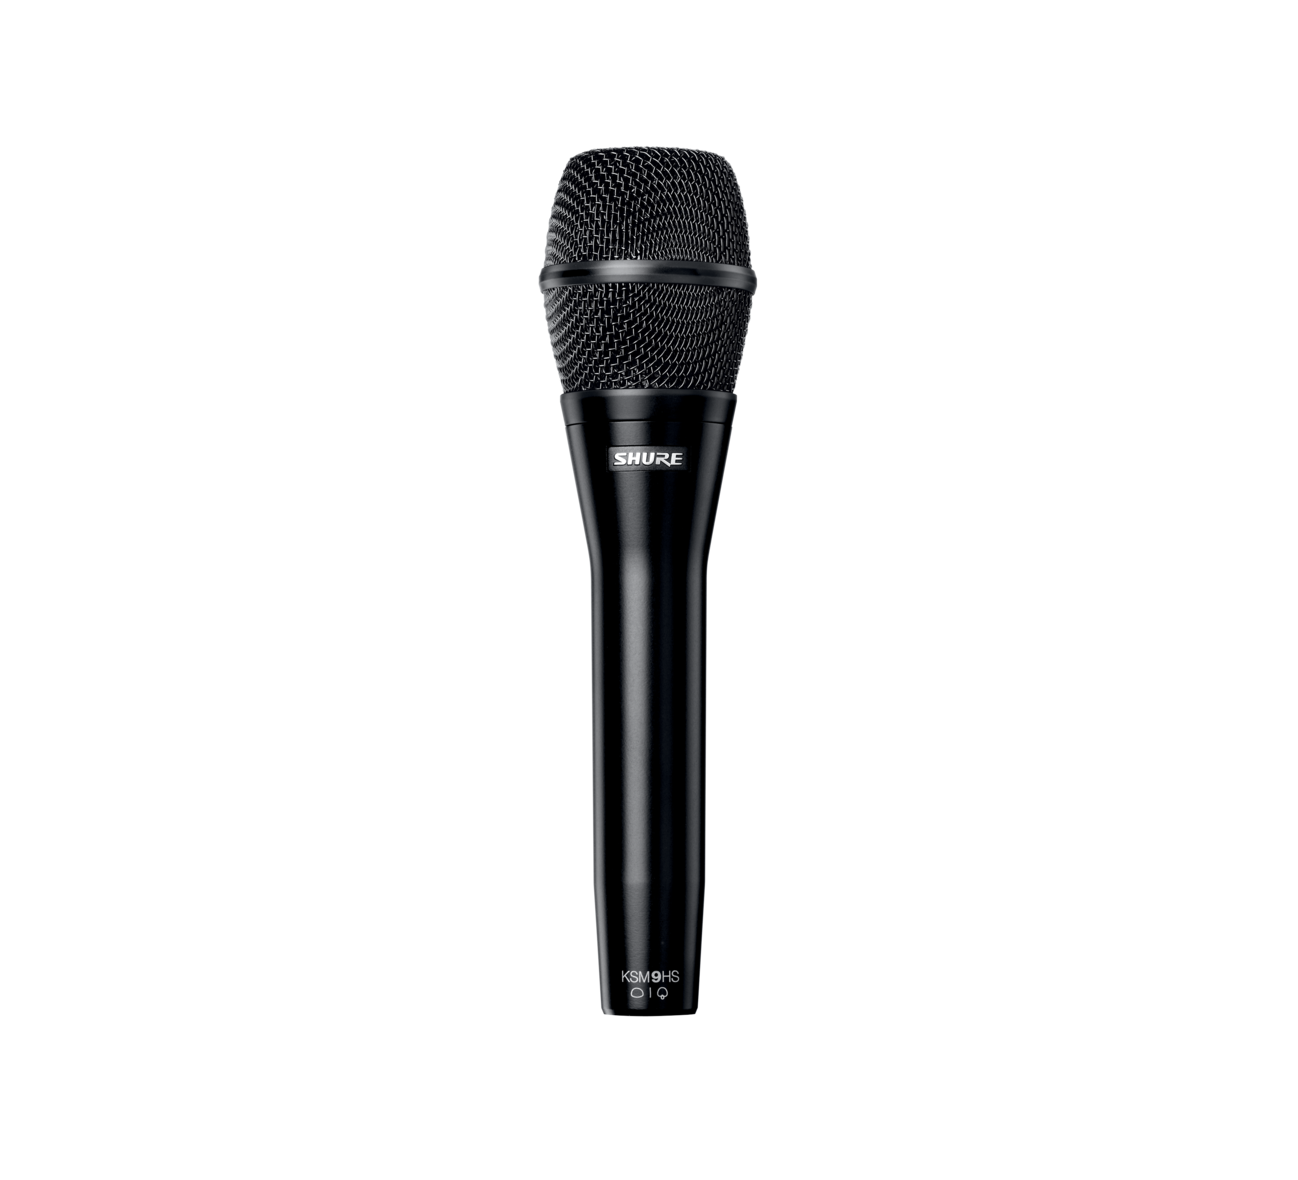 KSM9HS: Condenser Microphone, Switchable Polar Pattern (Hypercardioid / Subcardioid), Black, 3-pin XLR Connector
